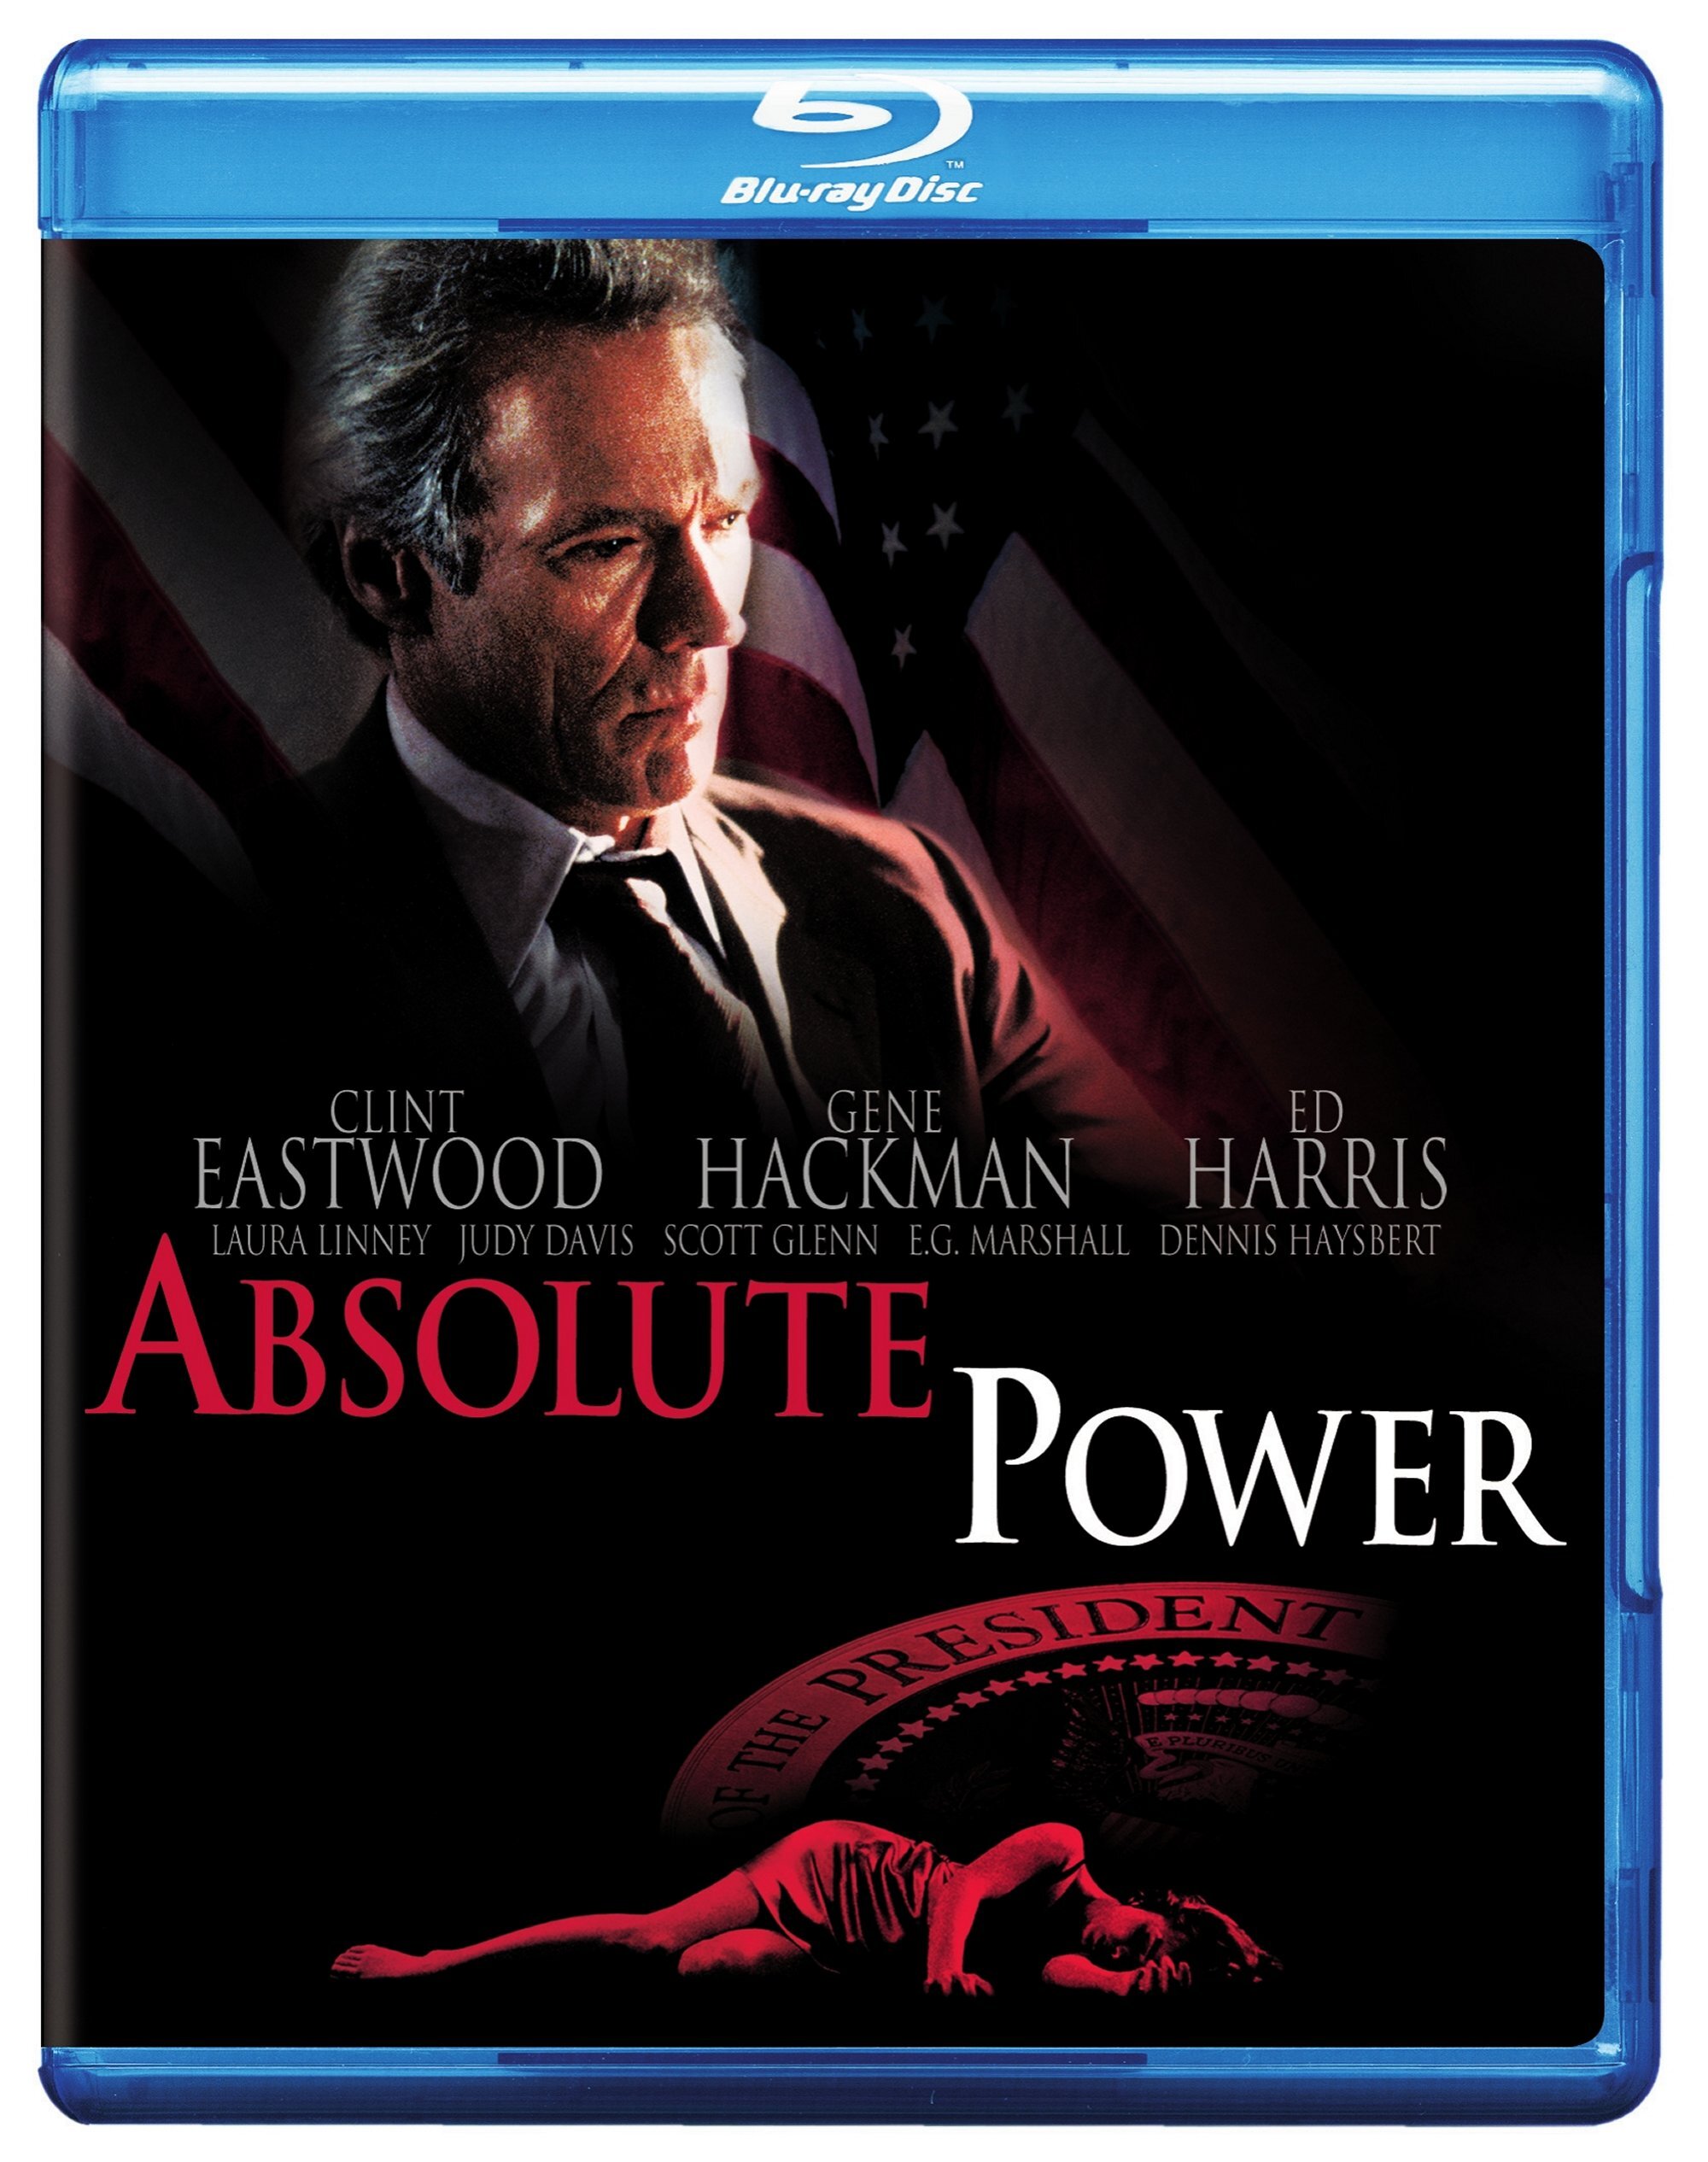 Absolute Power - Blu-ray [ 1997 ]  - Thriller Movies On Blu-ray - Movies On GRUV